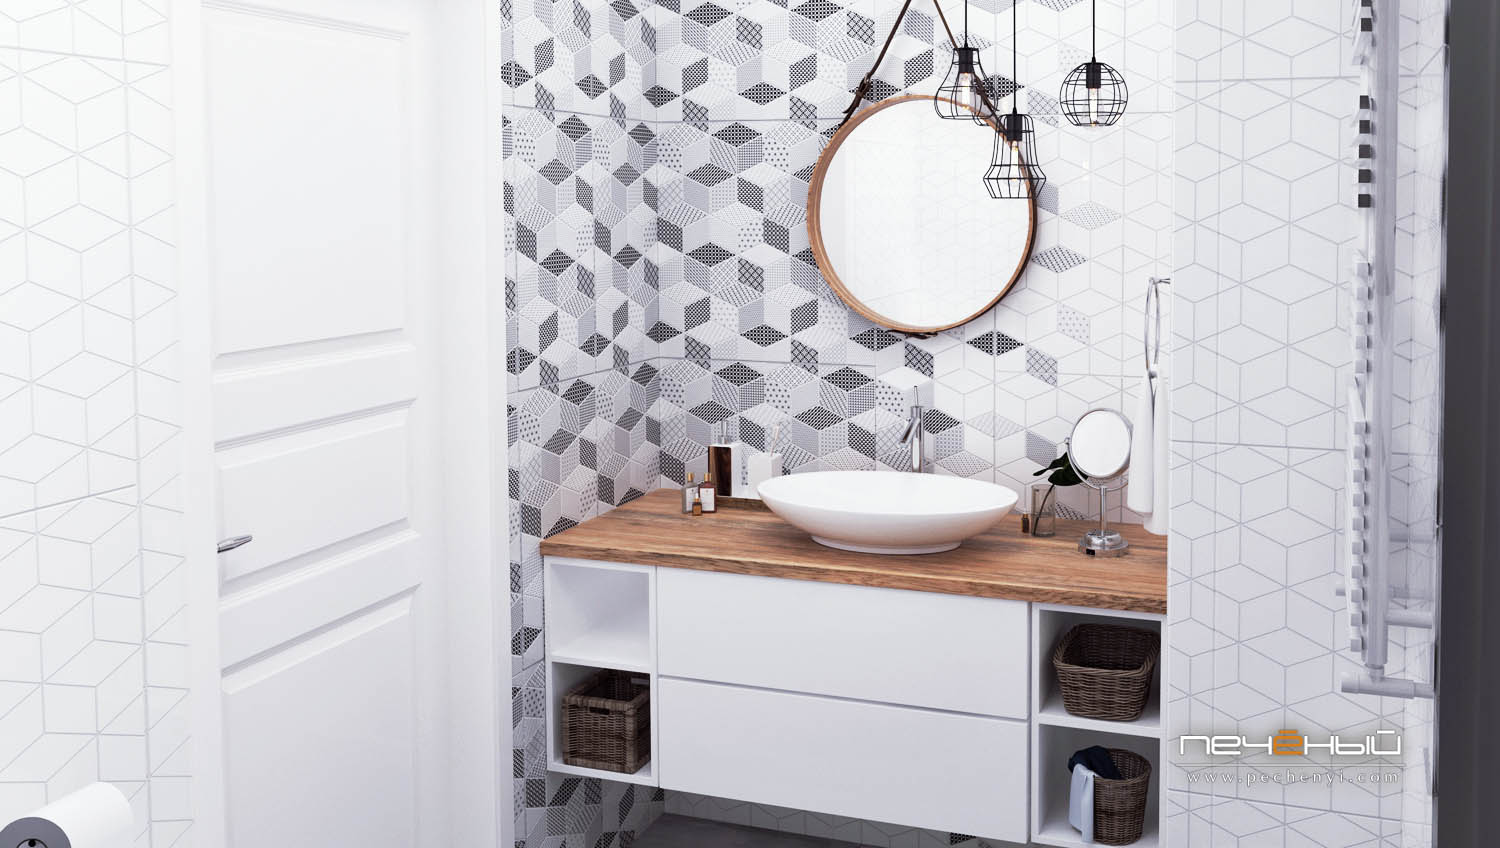 The bathroom is monochrome, with geometric tiles and Scandinavian lamps hanging from the ceiling